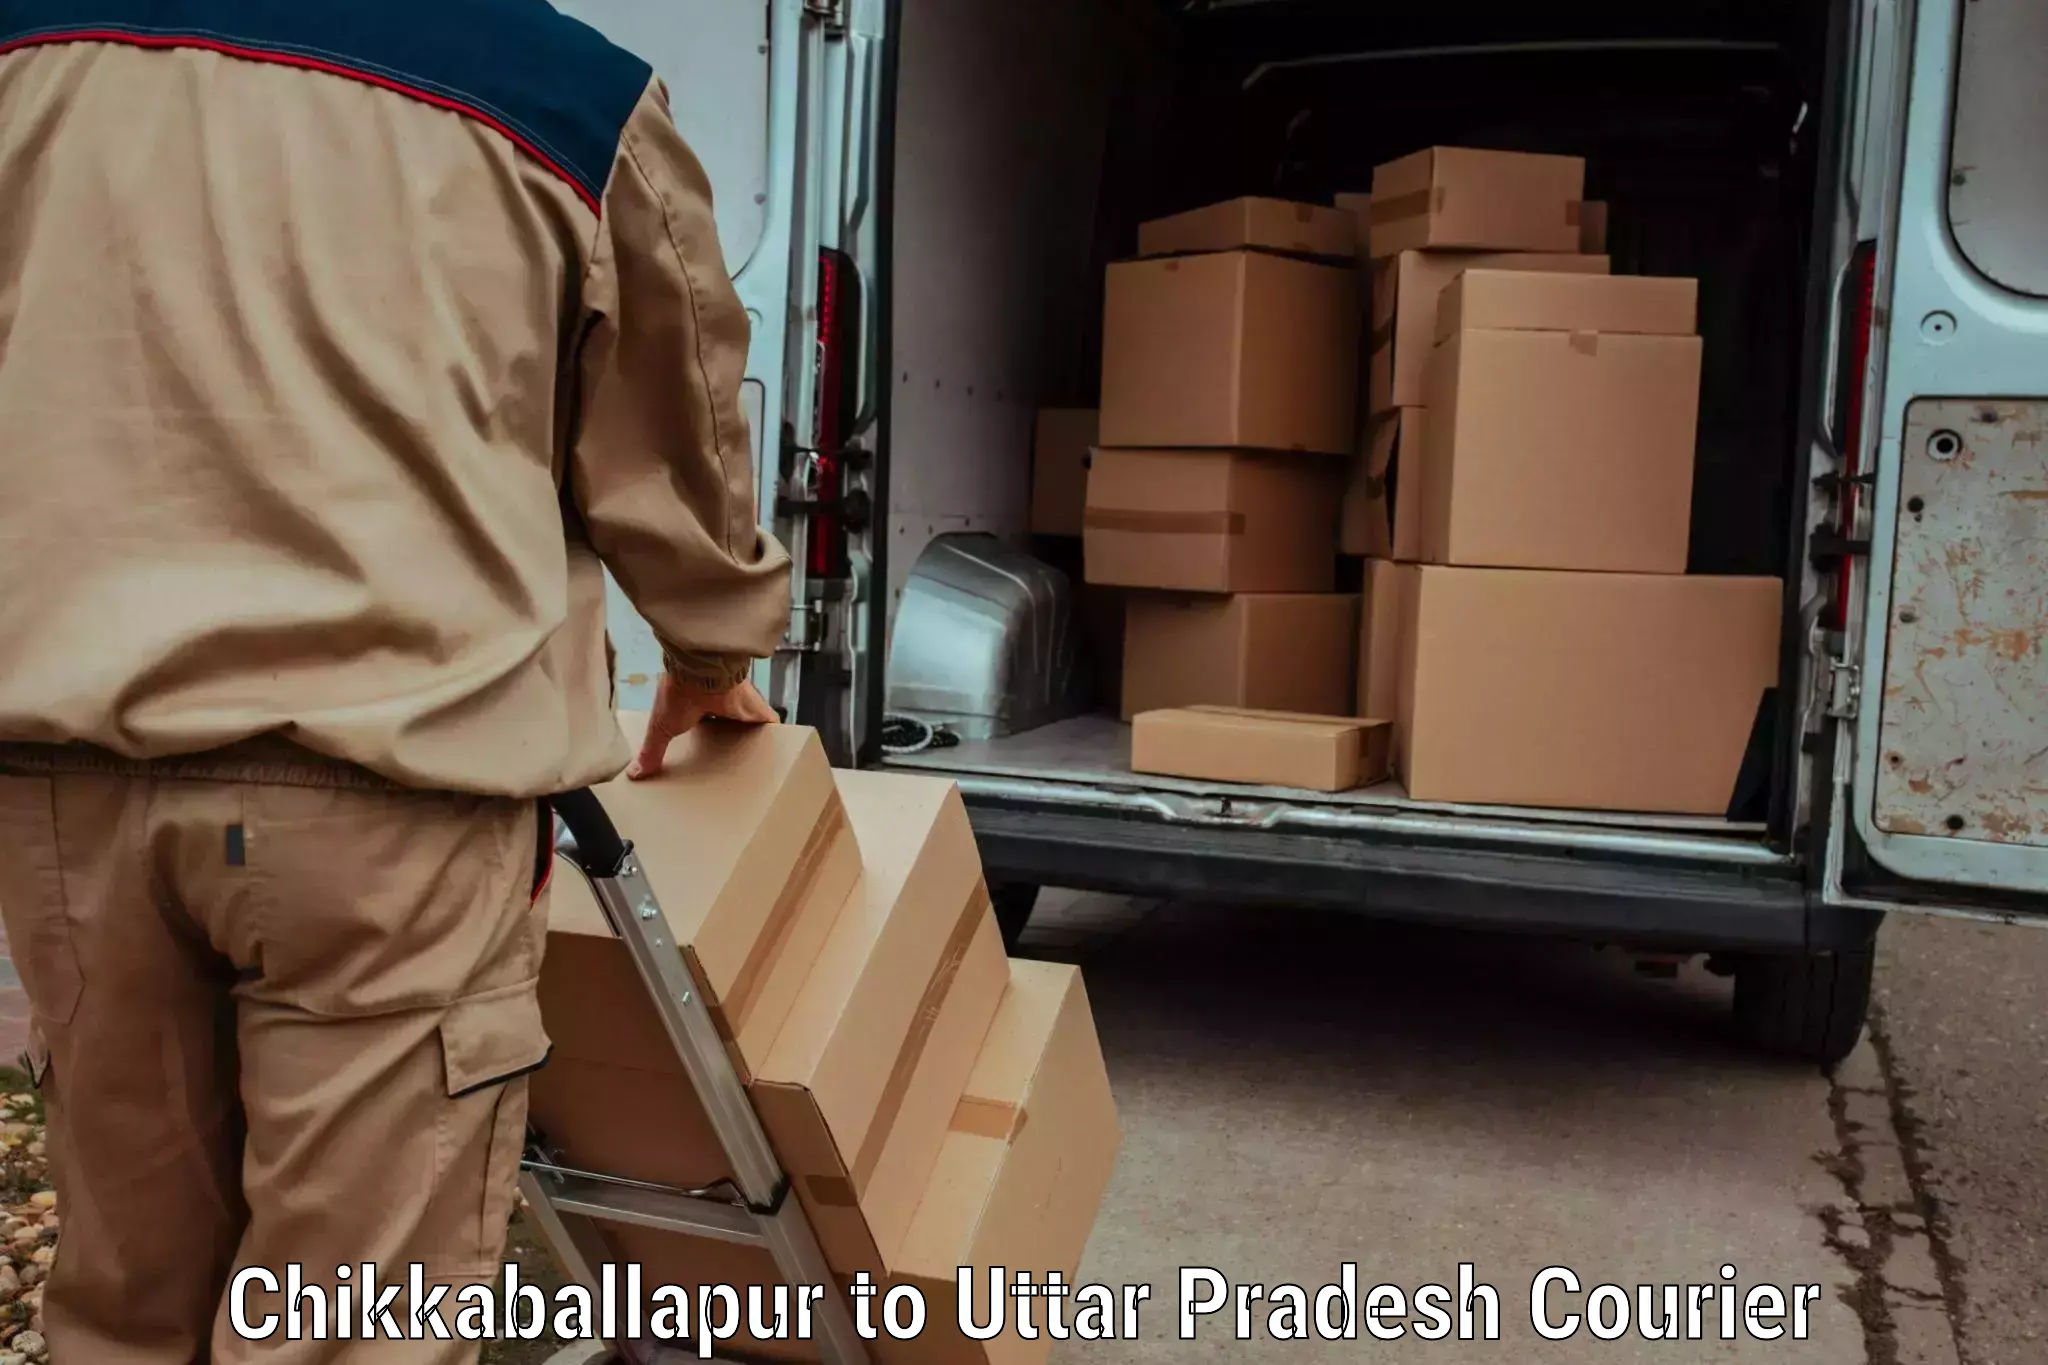 Multi-national courier services Chikkaballapur to Pilibhit